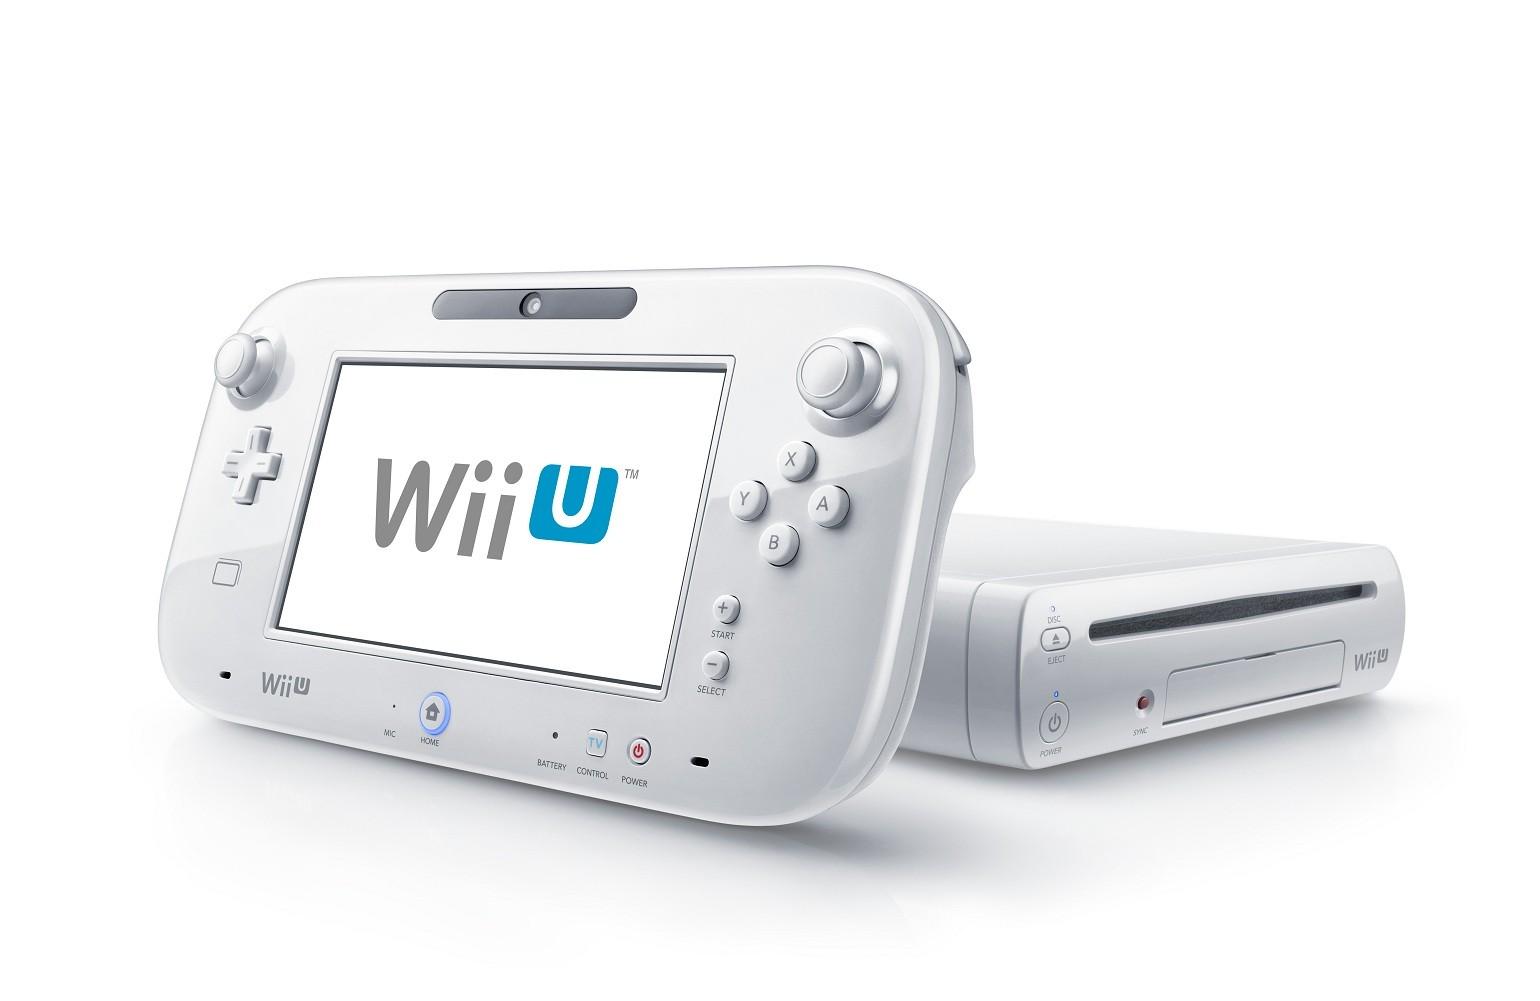 The Wii U will bounce back, it Just needs time.